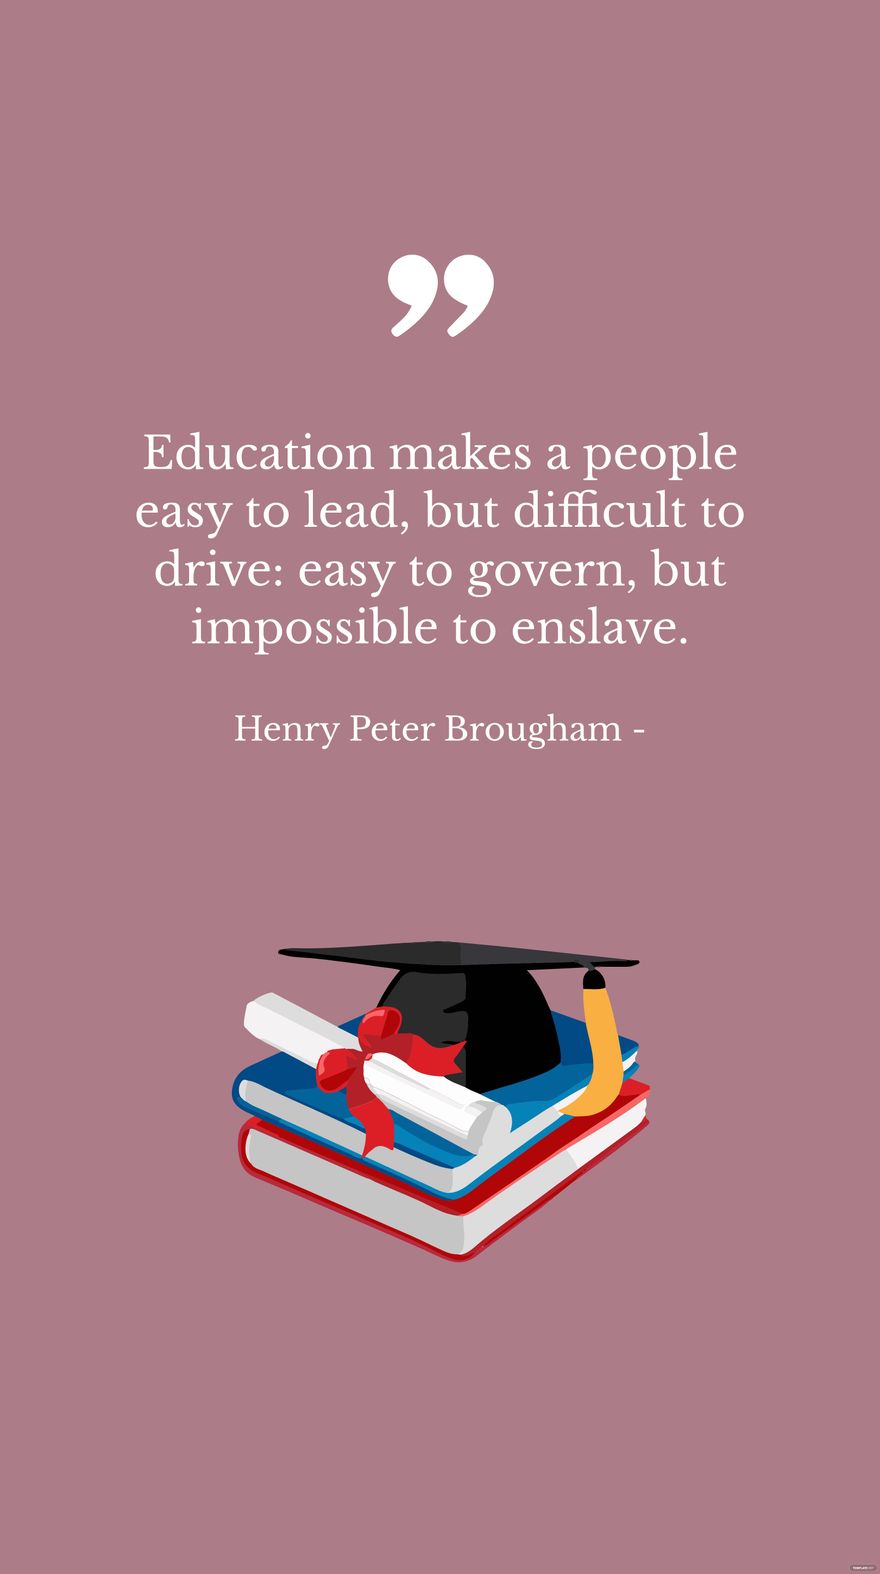 Free Henry Peter Brougham - Education makes a people easy to lead, but difficult to drive: easy to govern, but impossible to enslave. in JPG